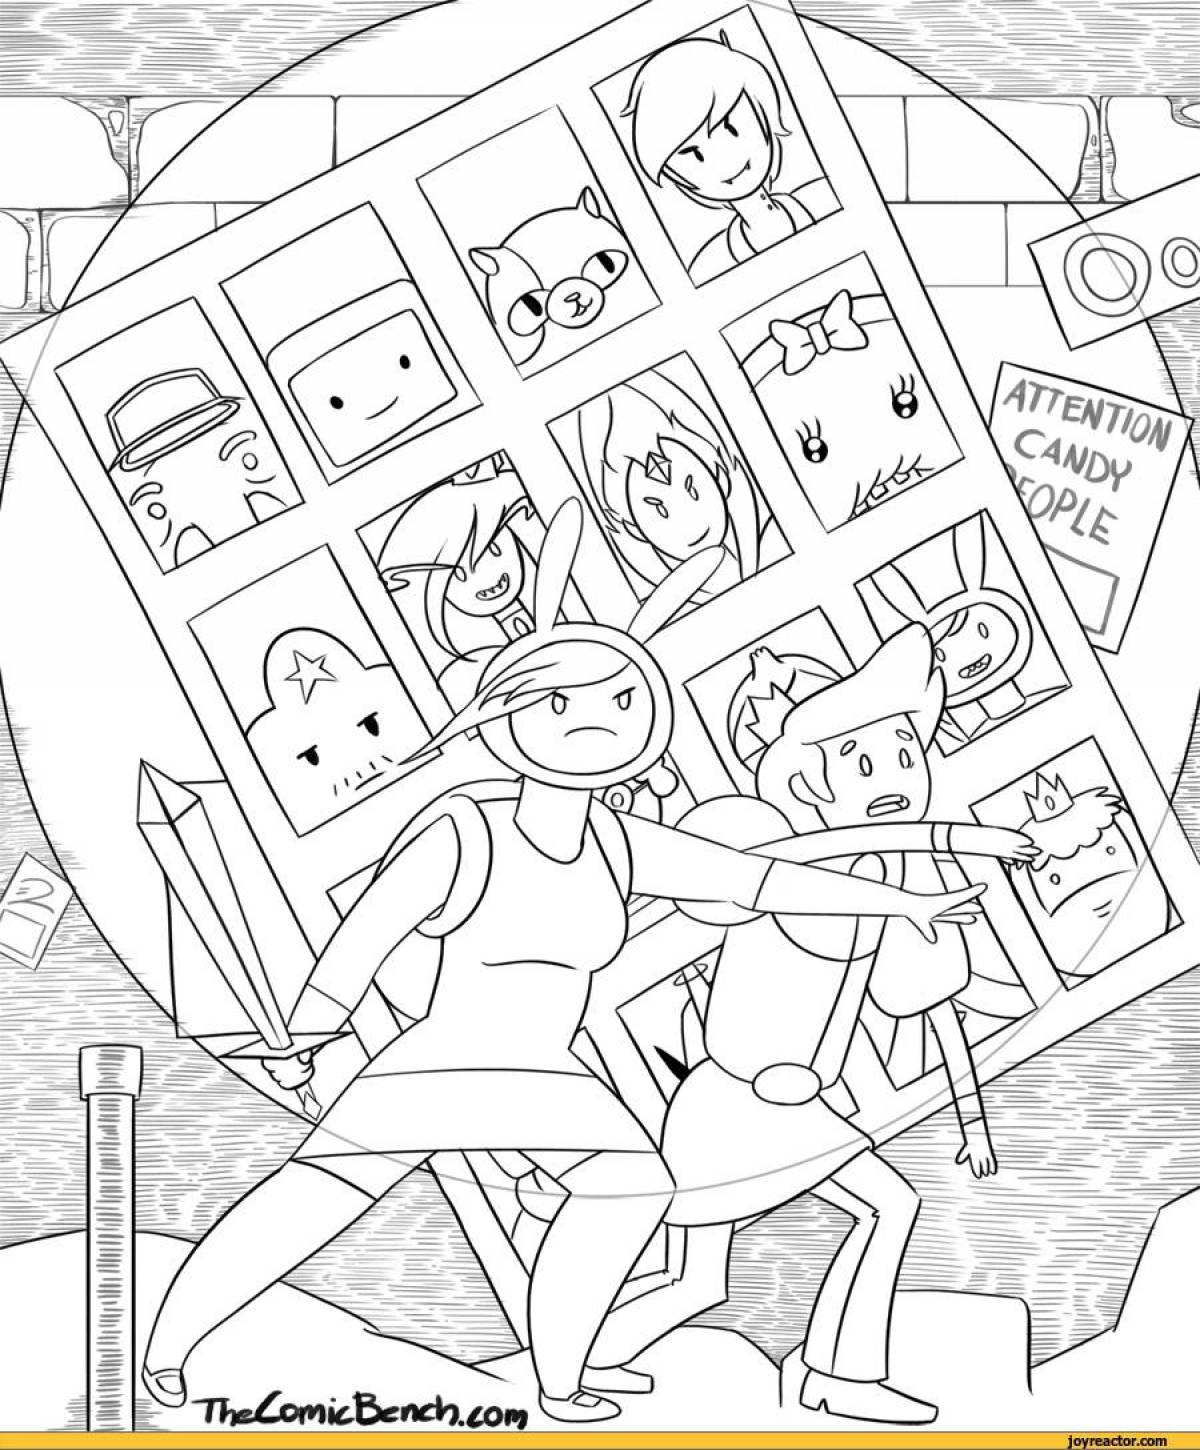 Poppy play time animated coloring page